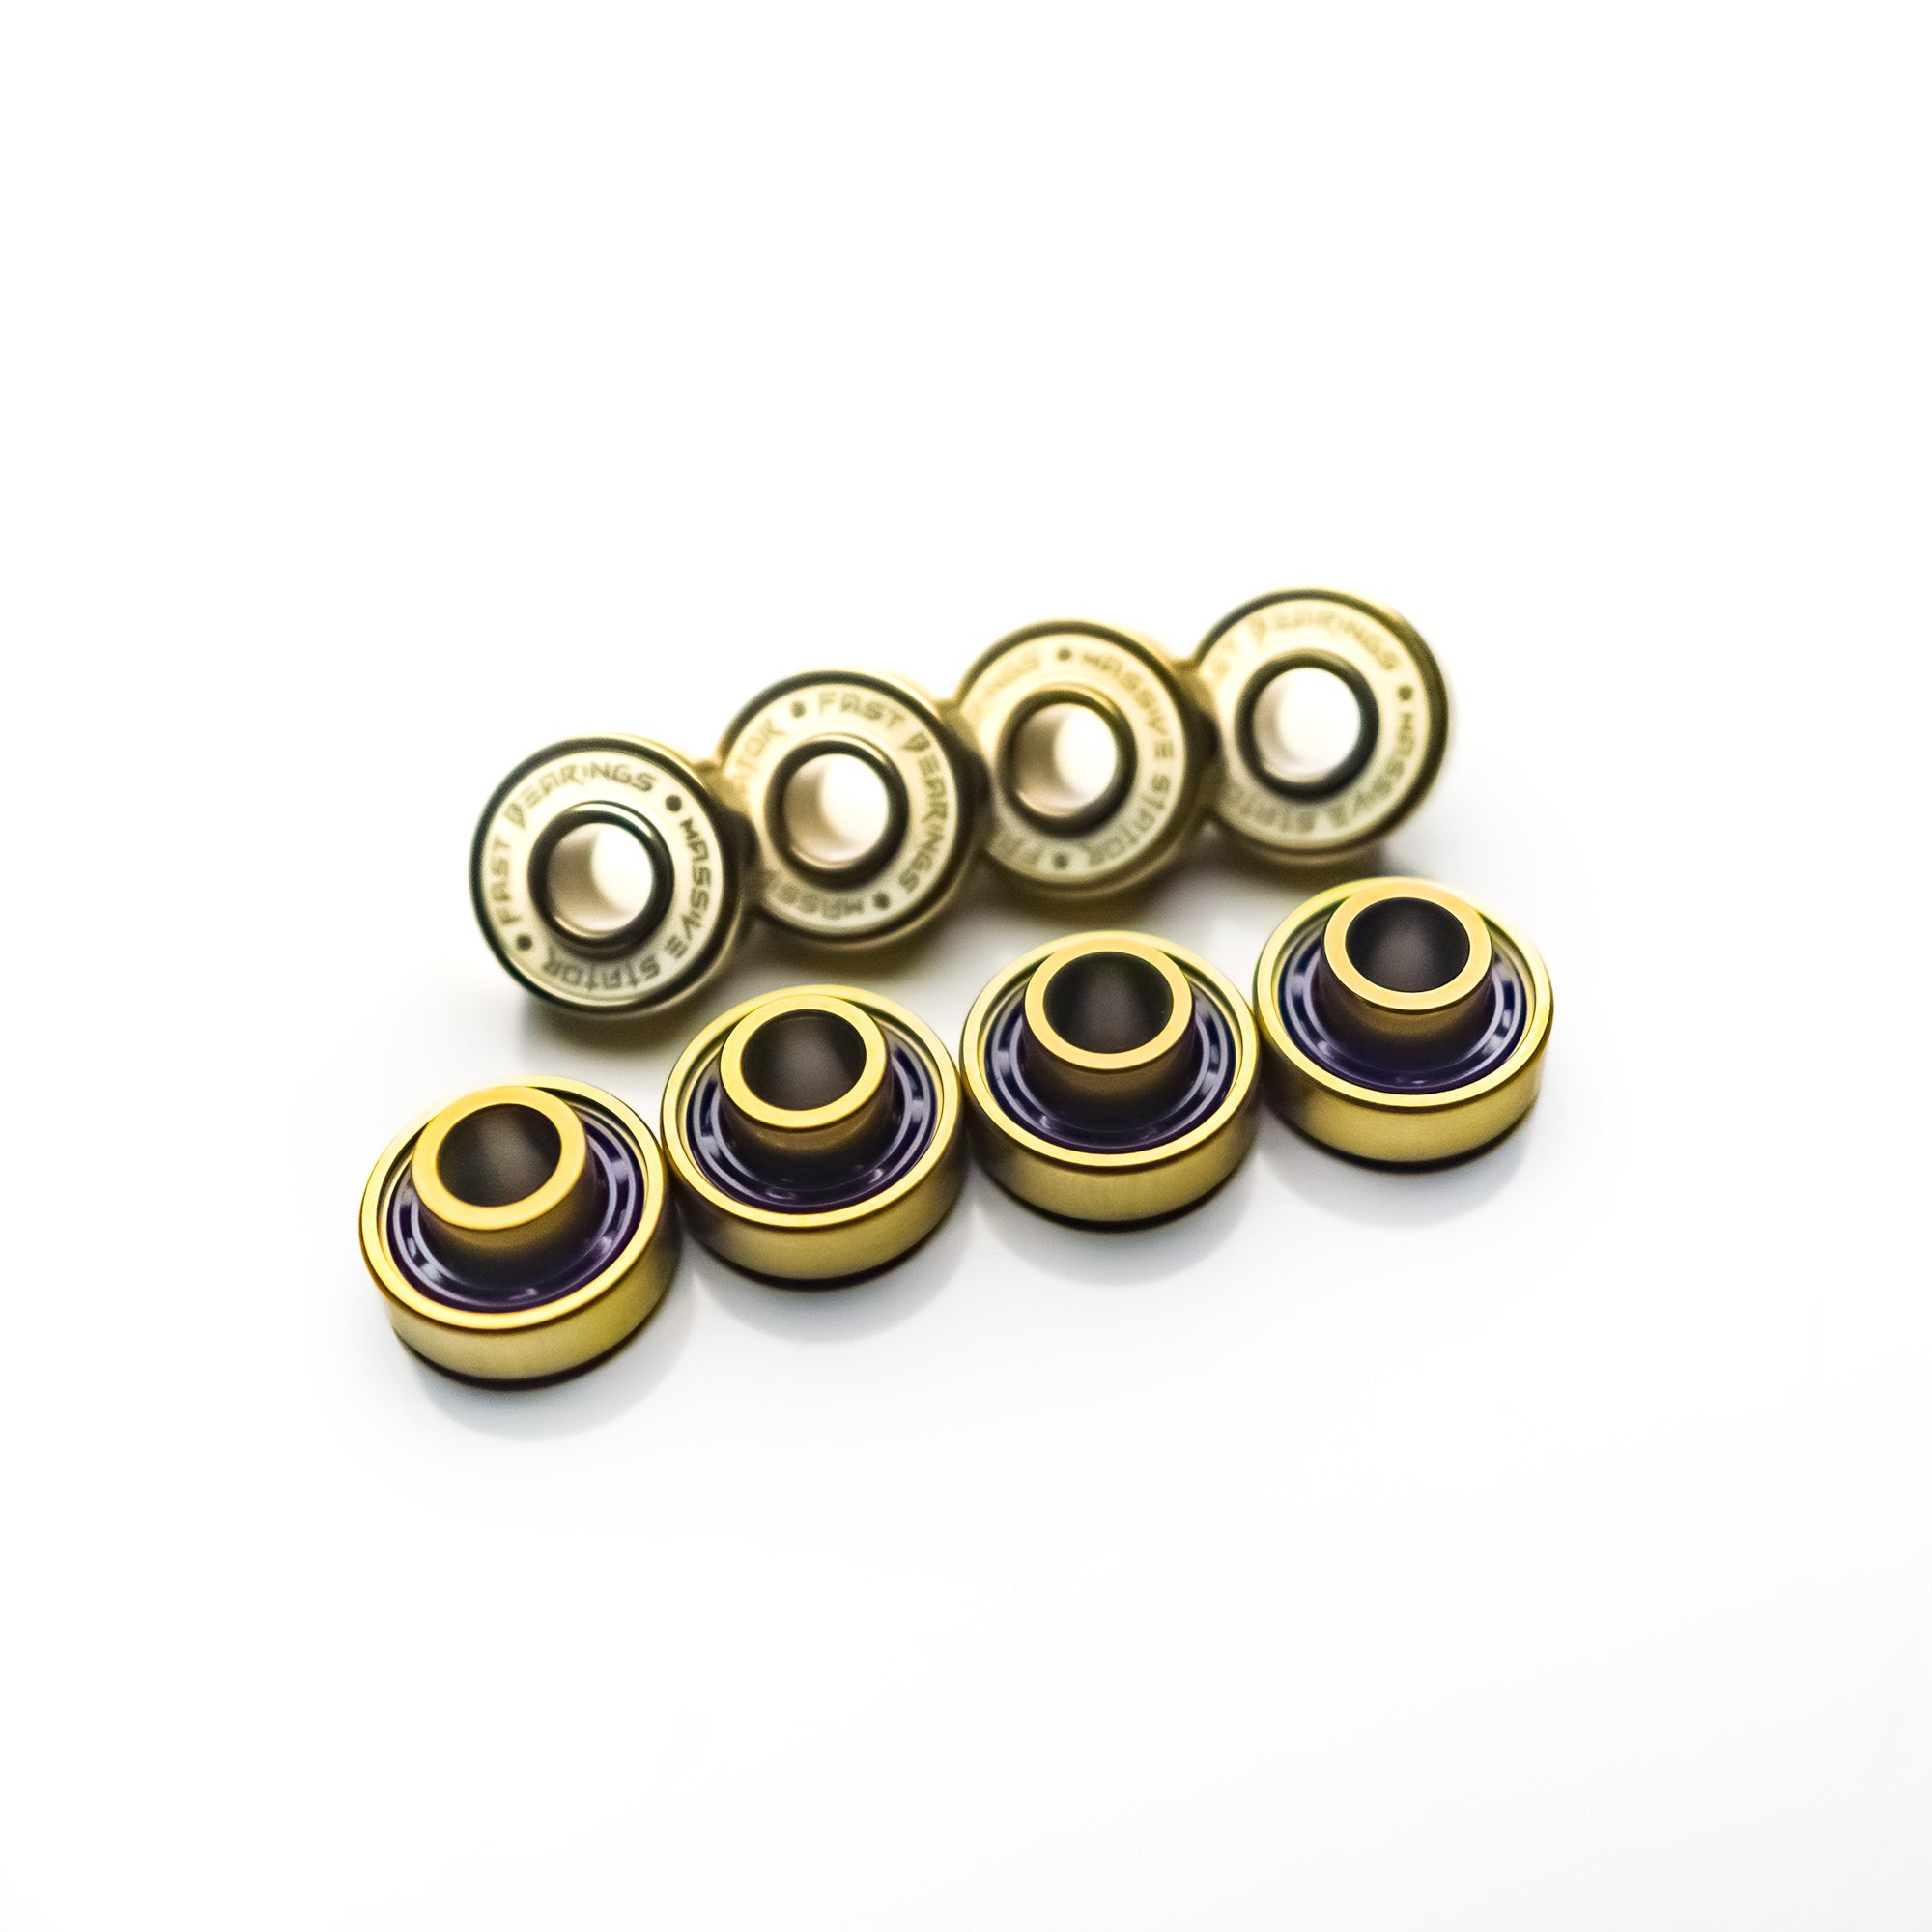 Titanium Fast Bearings With Built in Spacers 8pcs - Massive Stator 